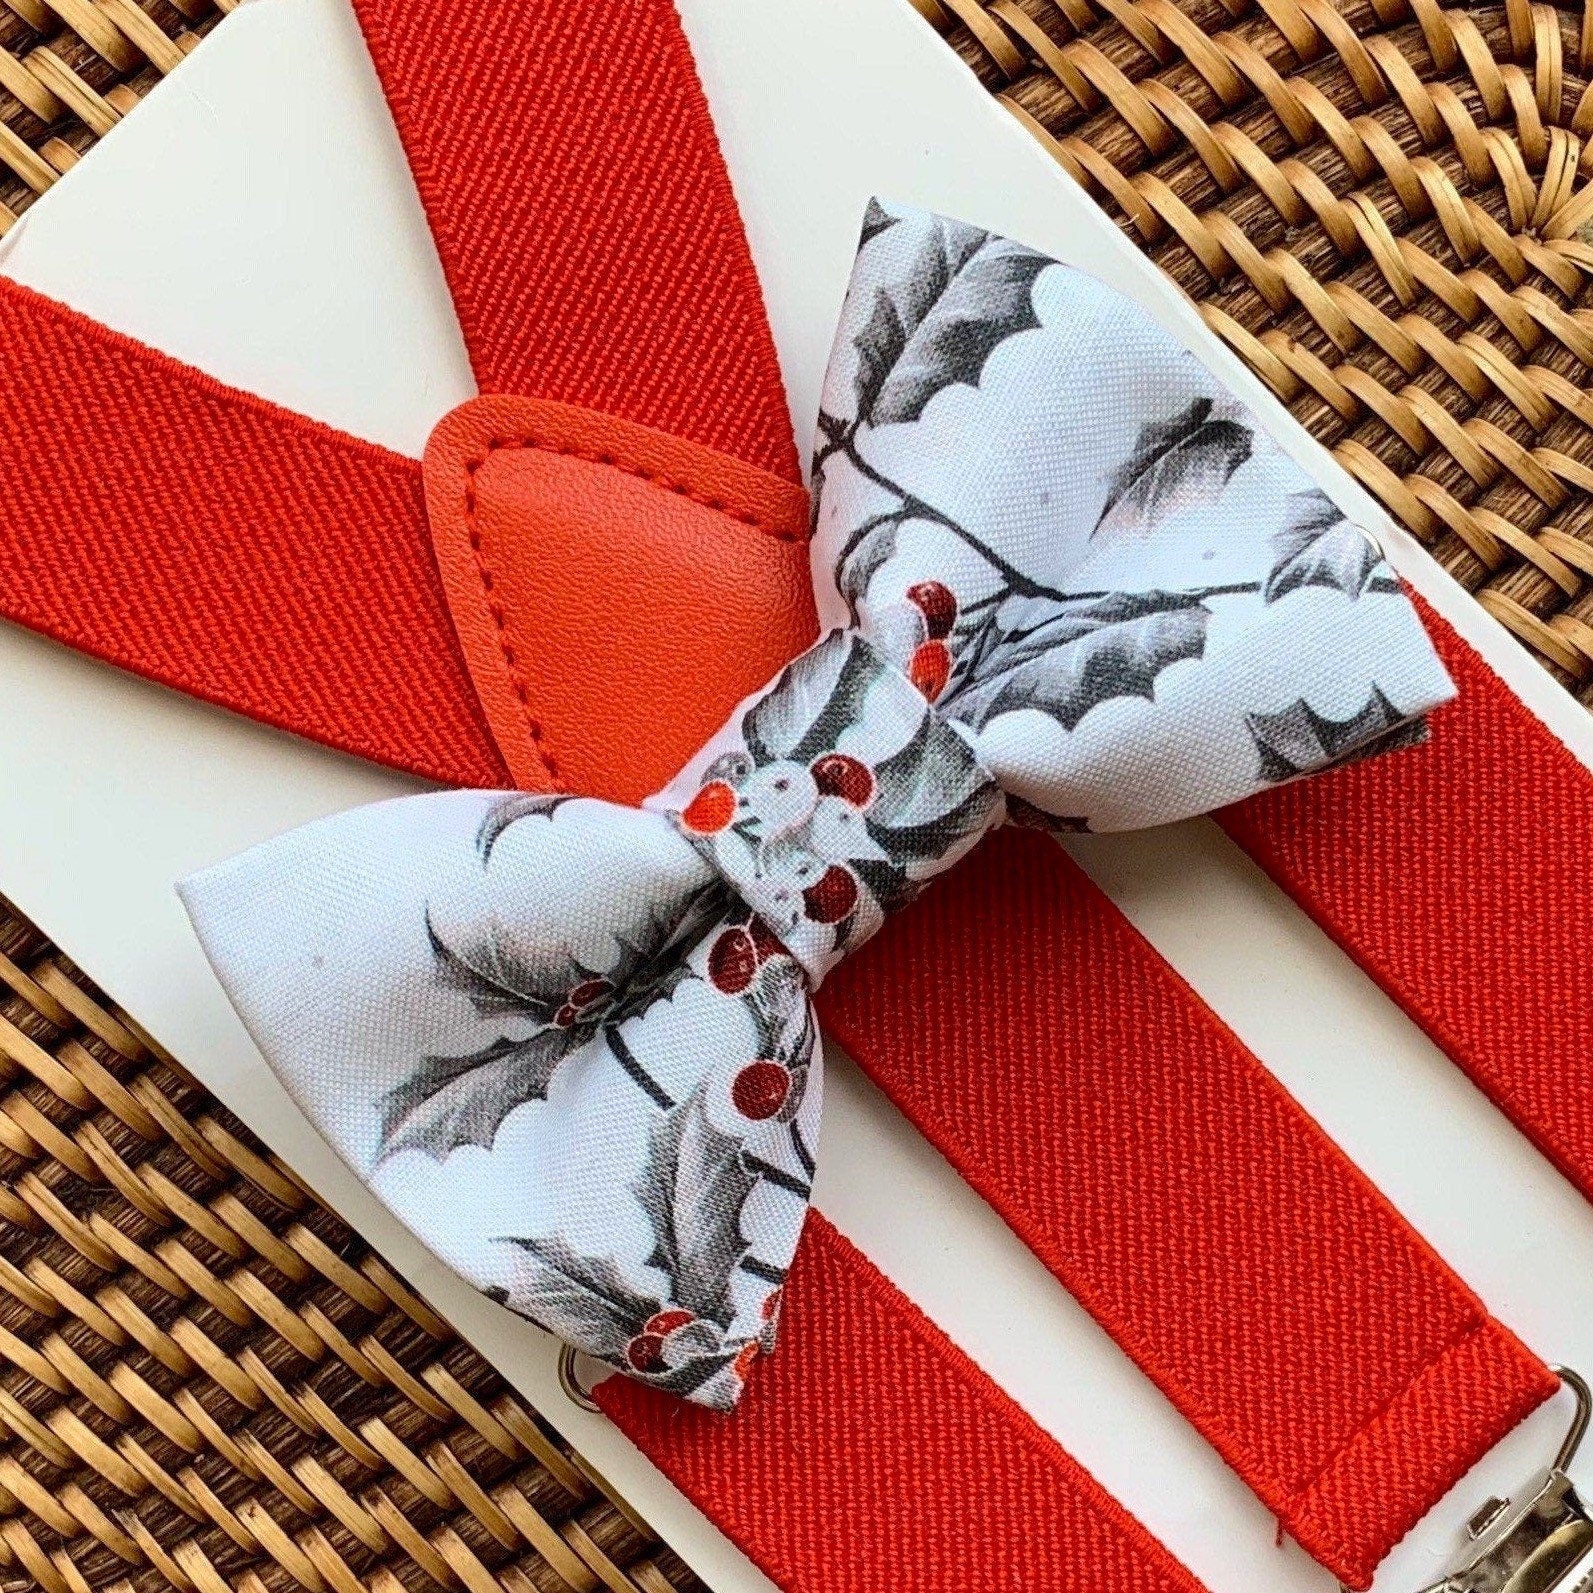 Holly Berry Bow Tie & Red Suspenders Set